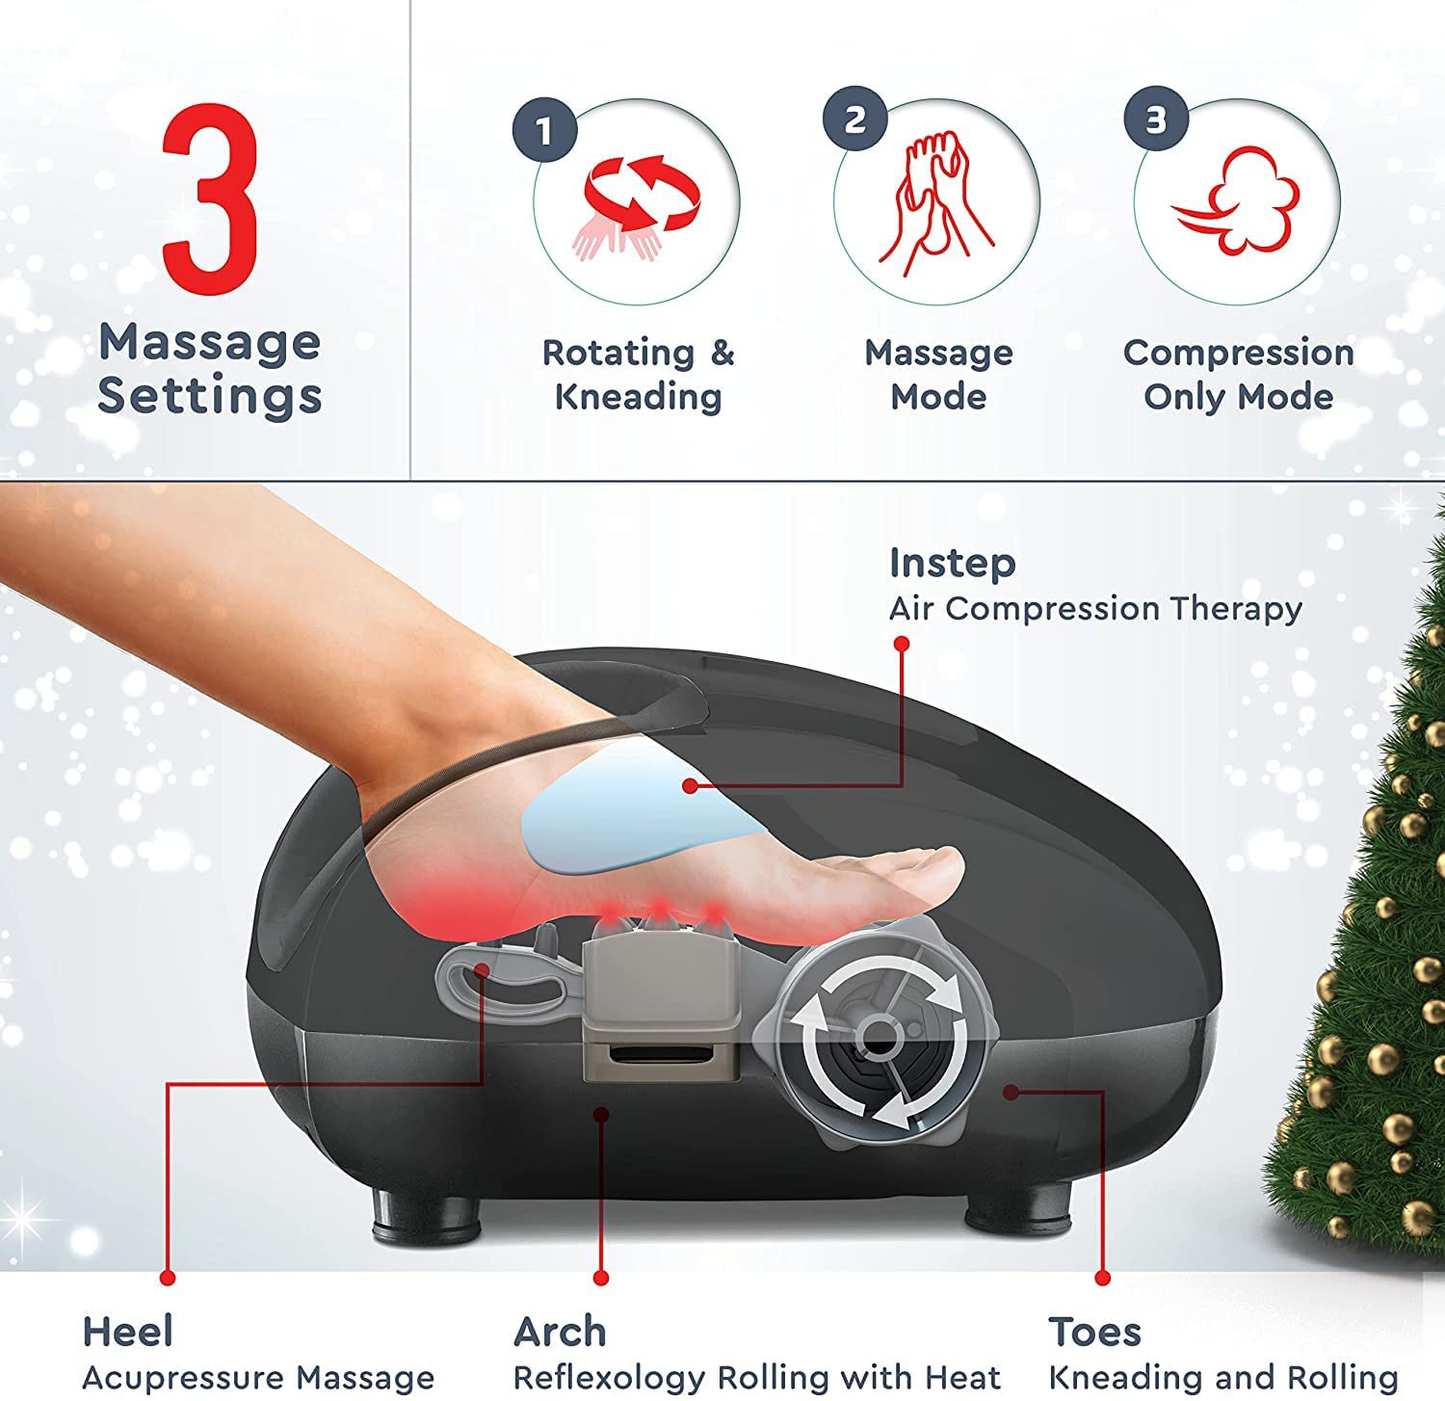 Shiatsu Foot Massager Machine - Plantar Fasciitis Relief with Heat Therapy, Foot Massagers for Neuropathy Pain and Circulation, Feet Massager for Pain Relief, Best Christmas Gift for Women Men Mom Dad